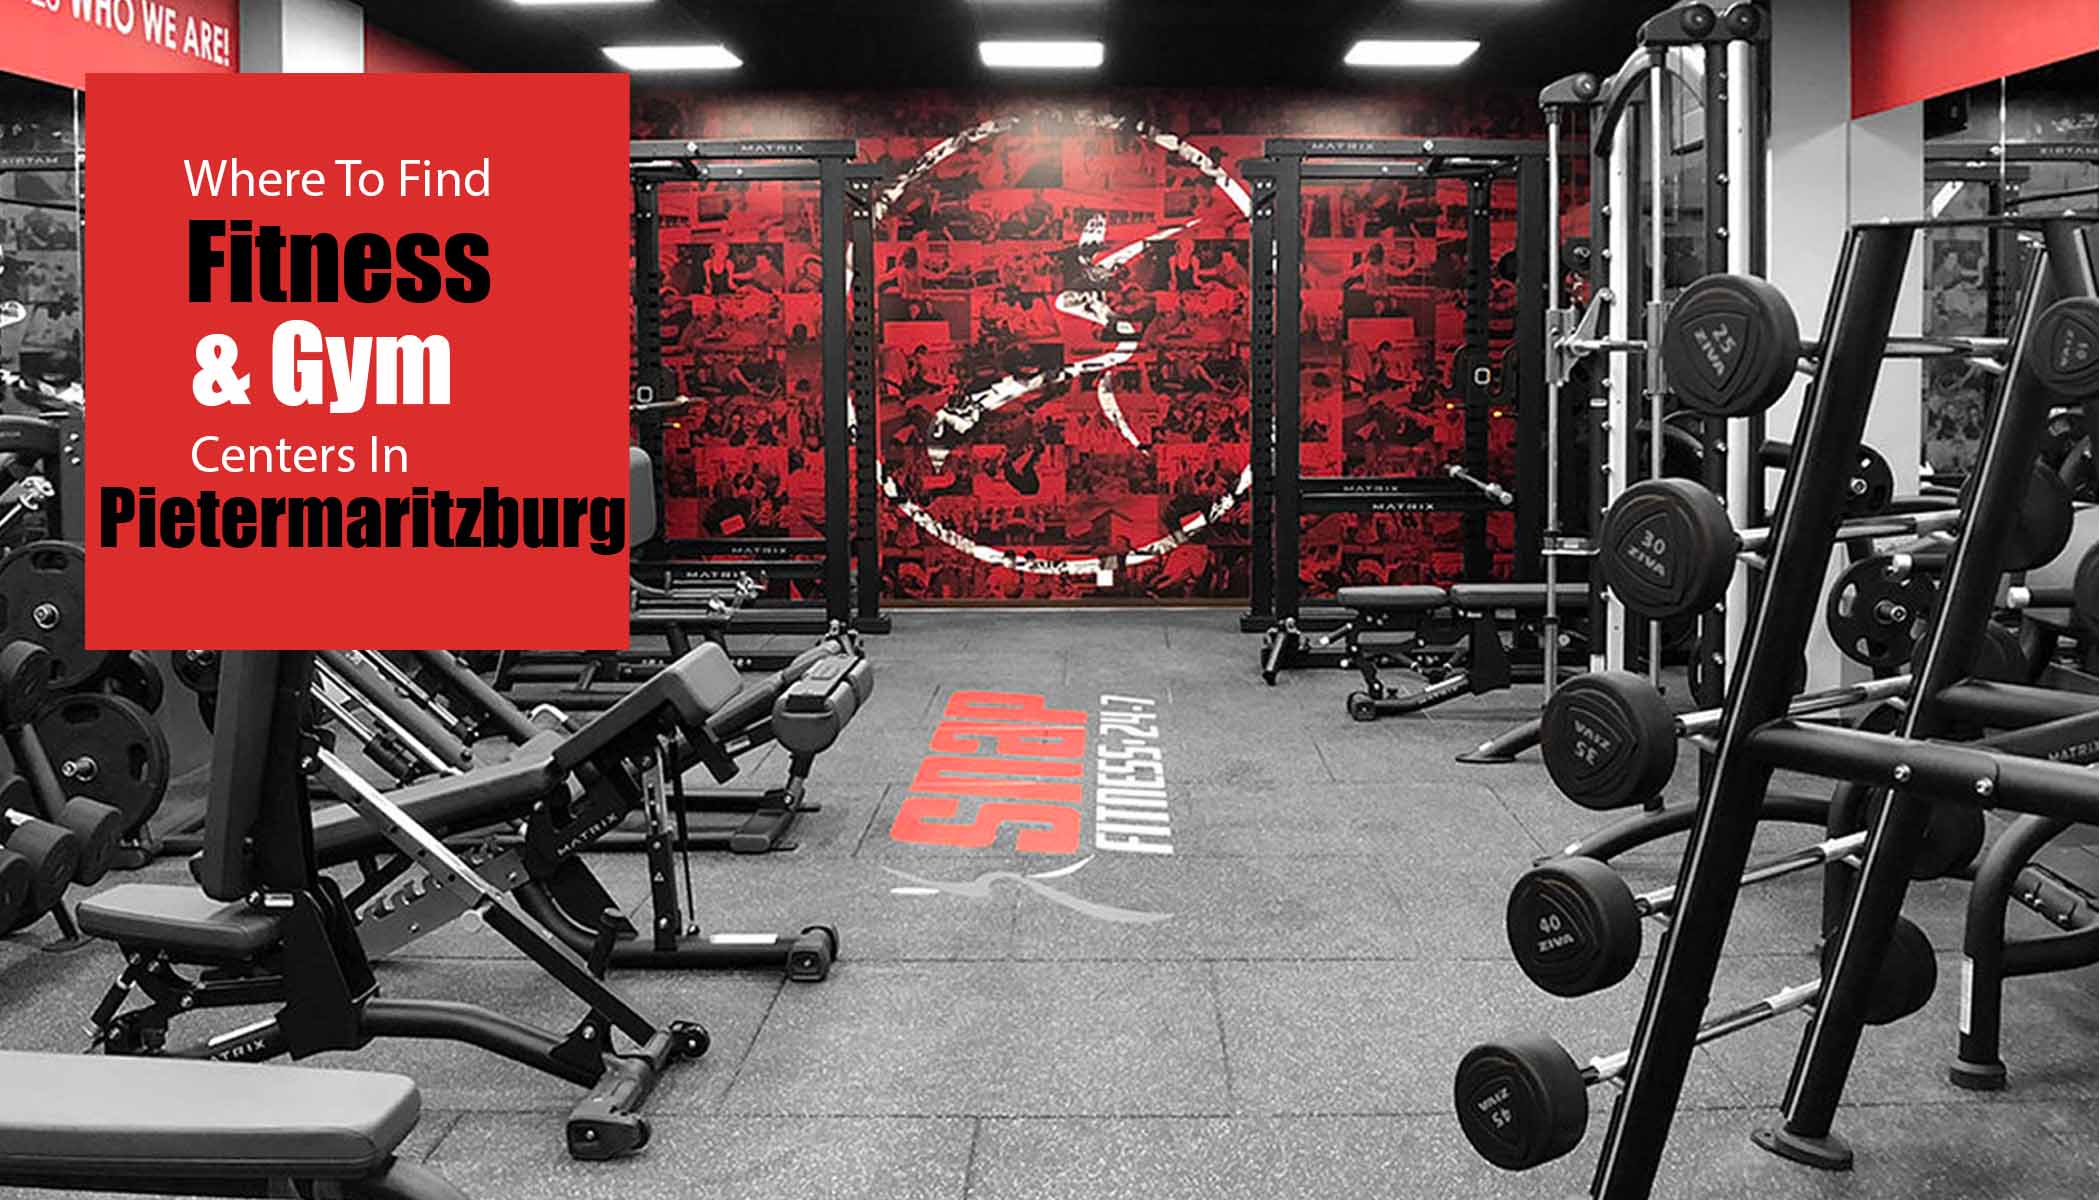 Where to Find Fitness and Gym Centers in Pietermaritzburg